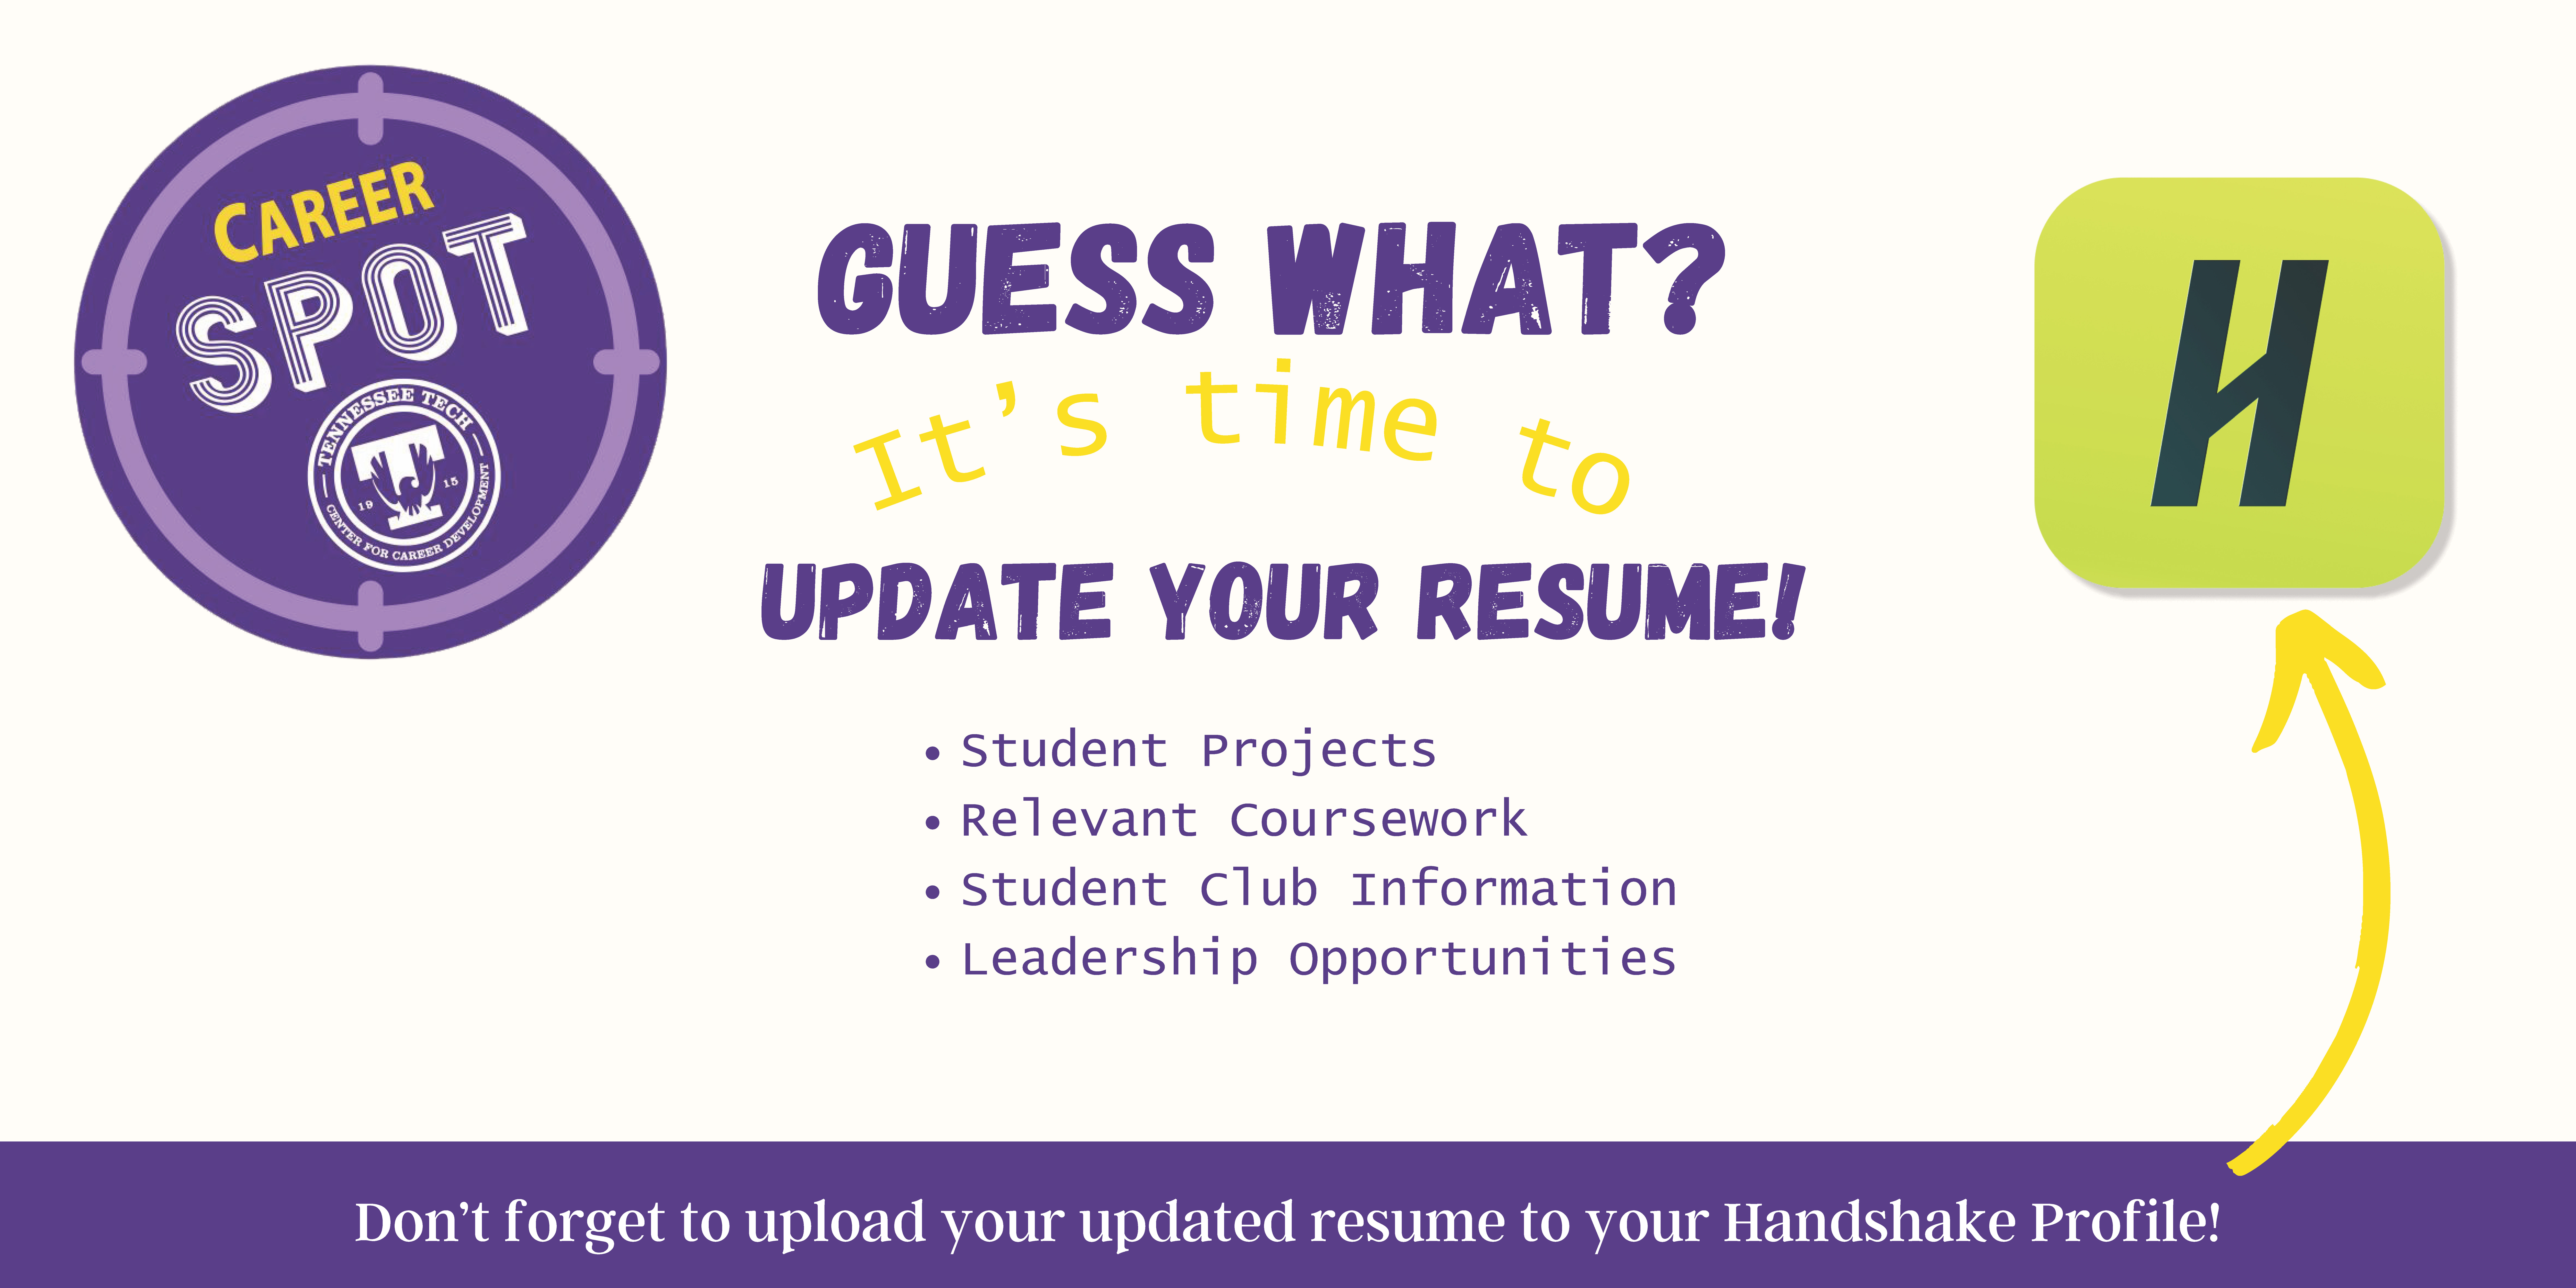 It's time to update your resume in Handshake!